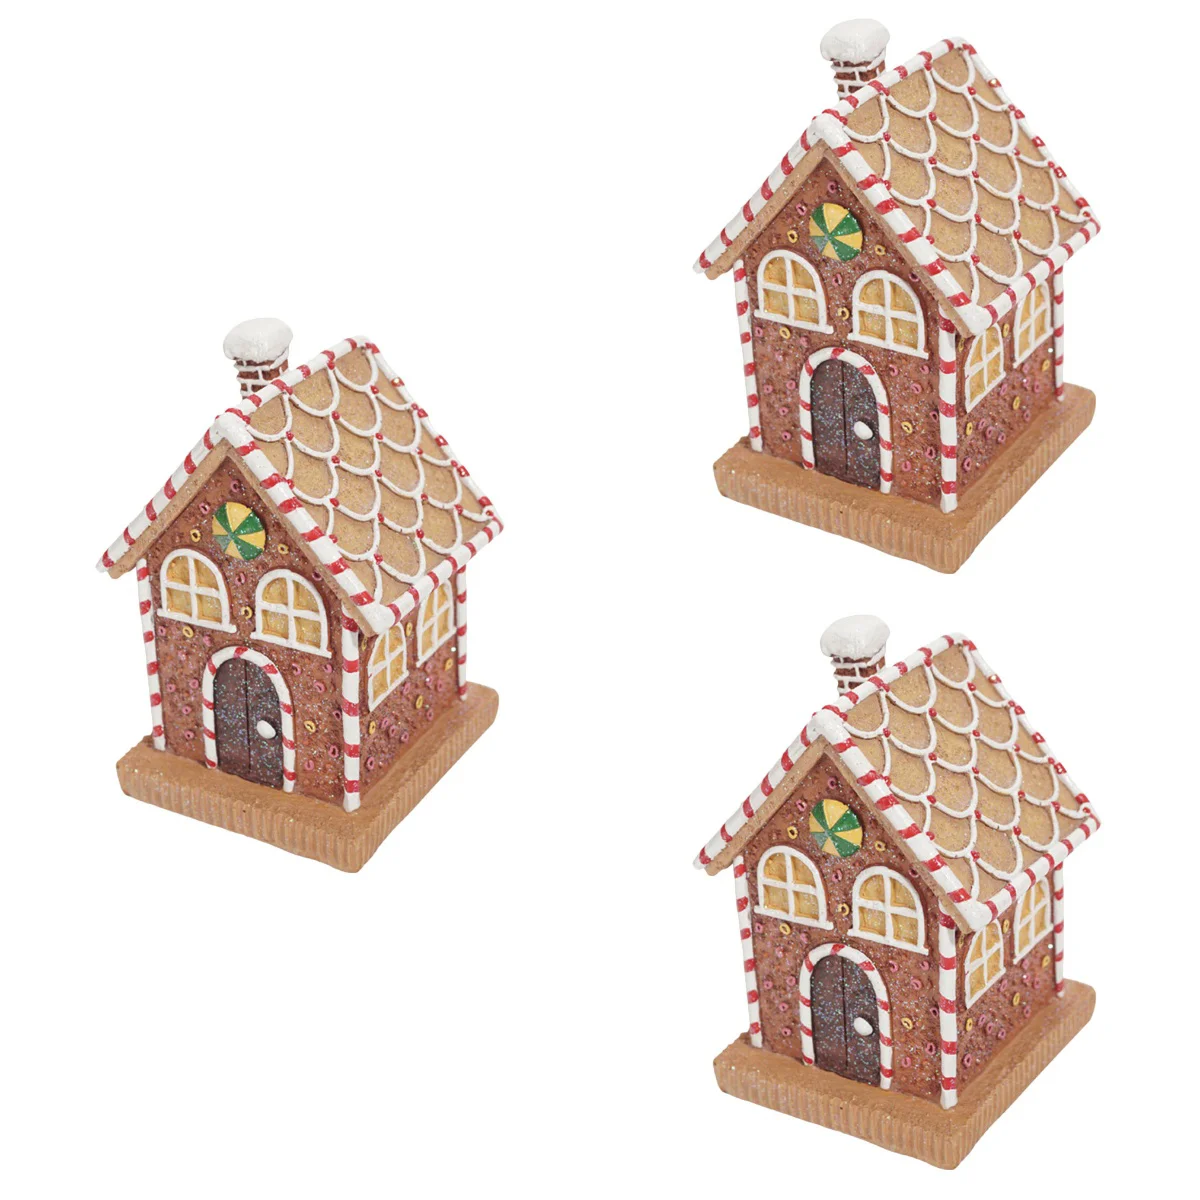 

3x Desktop Figurines Xmas Lighted Ornaments Light Up Christmas Village Chimney Gingerbread House Figuine Gingerbread House